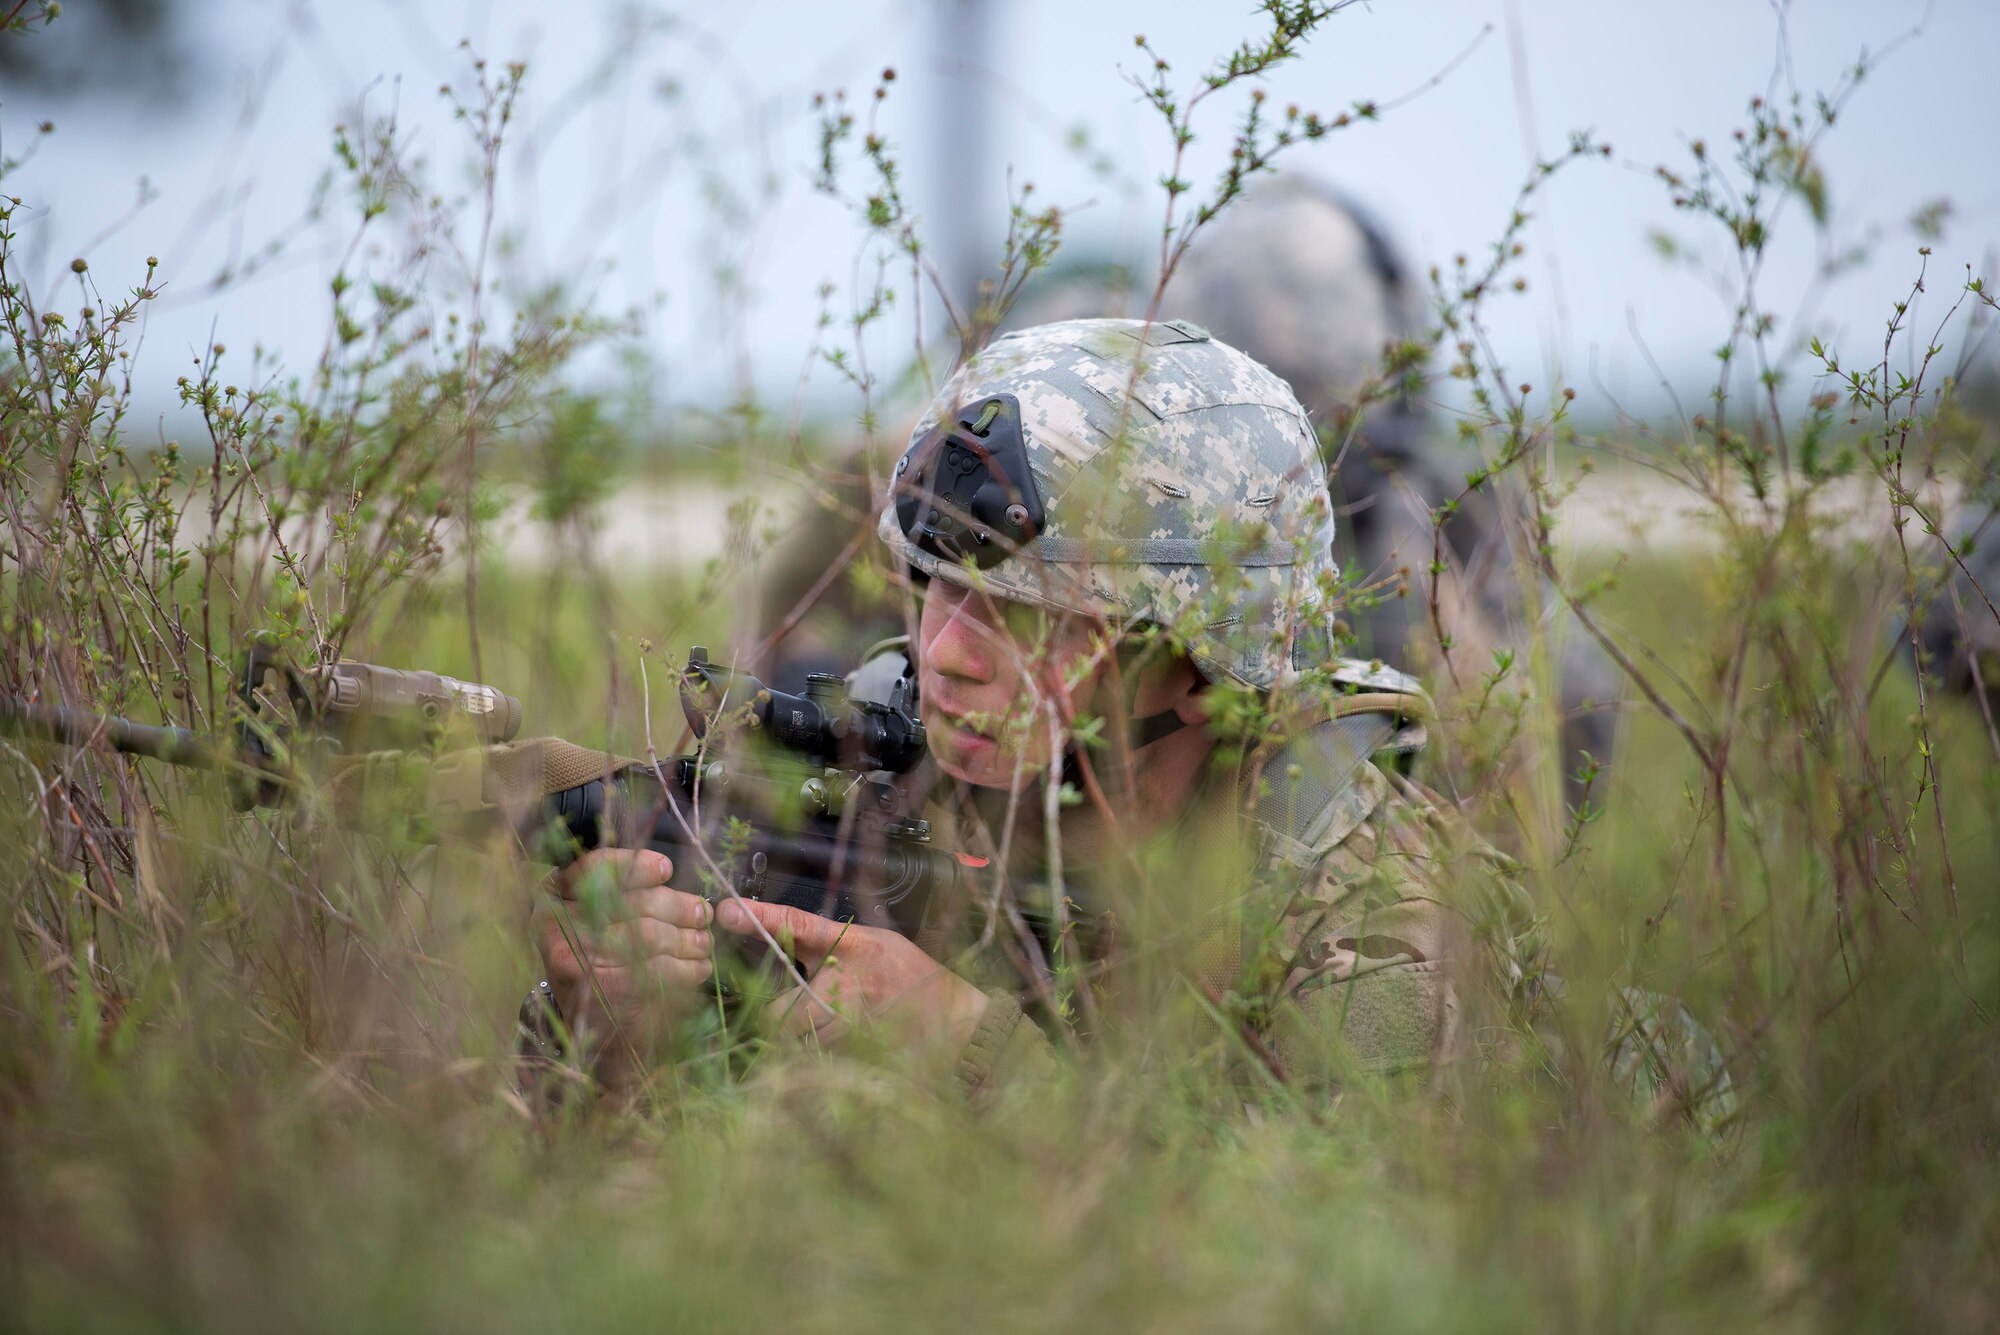 U.S. Air Force Tech Sgt. Brian Marshall, 823d Base Defense Squadron NCO in charge of training, provides cover for his team during a care under fire scenario, April 13, 2016, at Avon Park Air Force Range, Fla. Airmen had to rescue a simulated causality, provide self-aid buddy care, and get the causality to safety. (U.S. Air Force photo by Airman 1st Class Janiqua P. Robinson/Released)